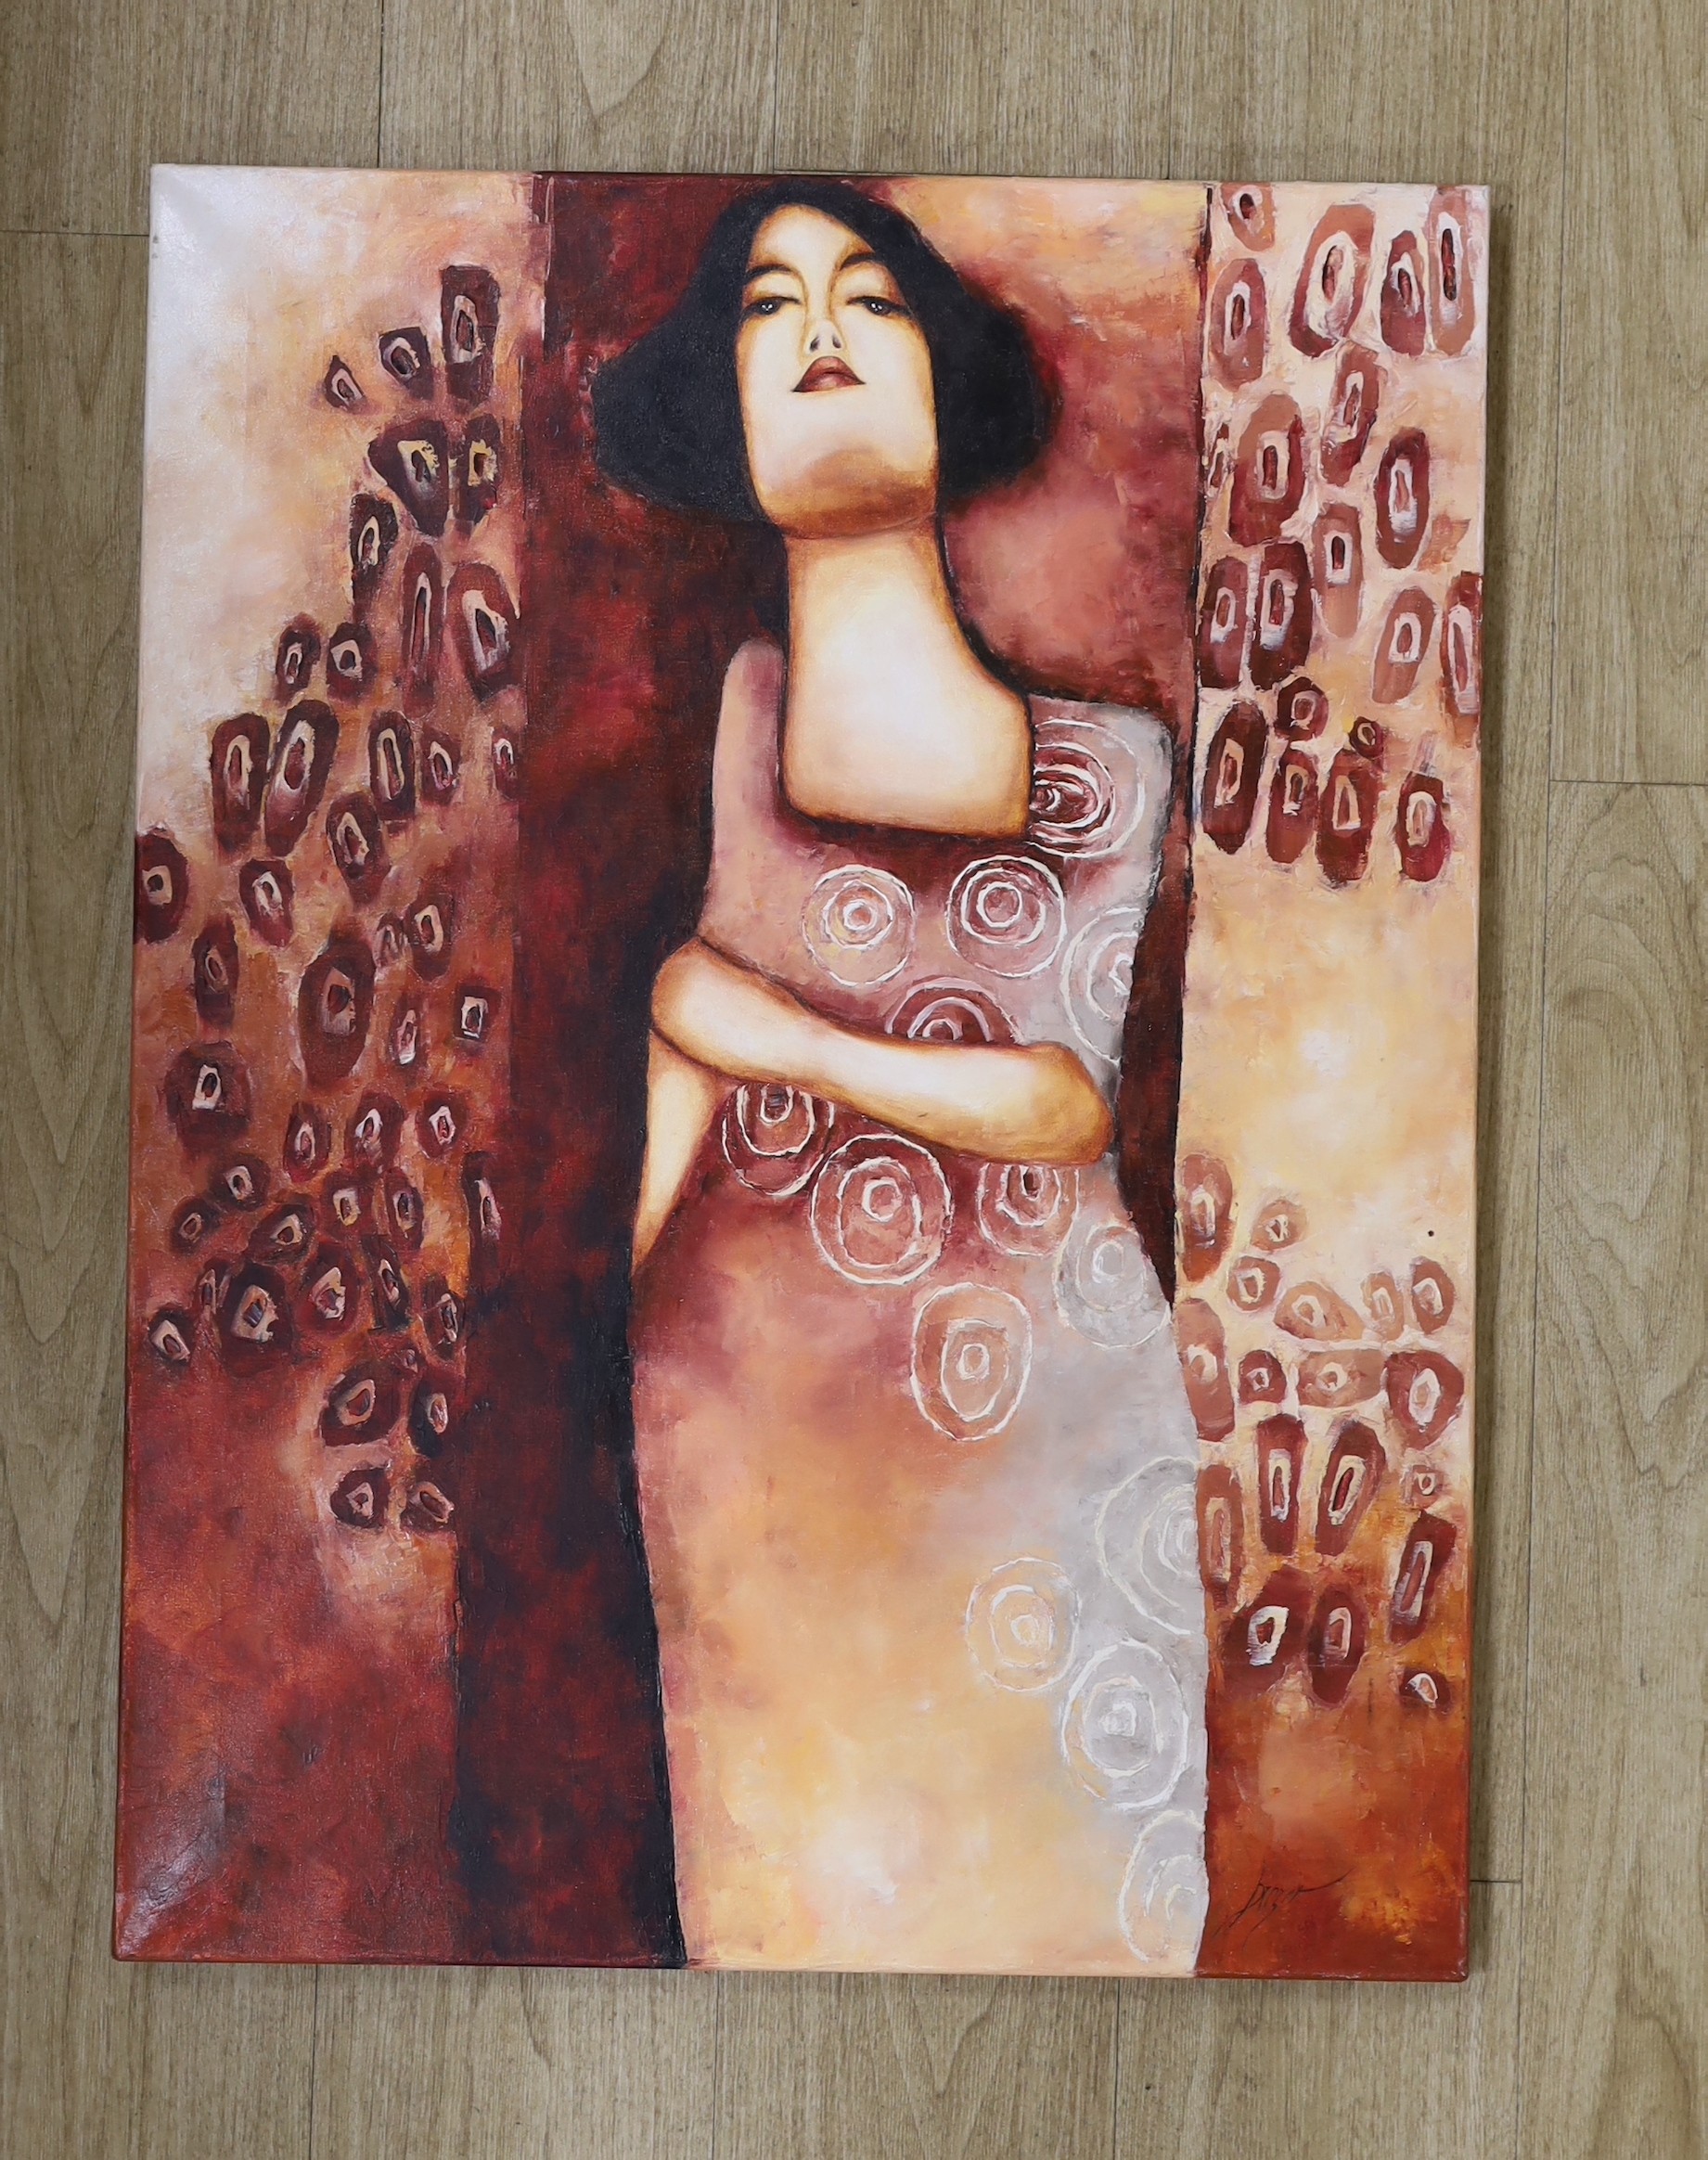 Brazer, oil on canvas, Secessionist style woman, signed, 80 x 60cm, unframed